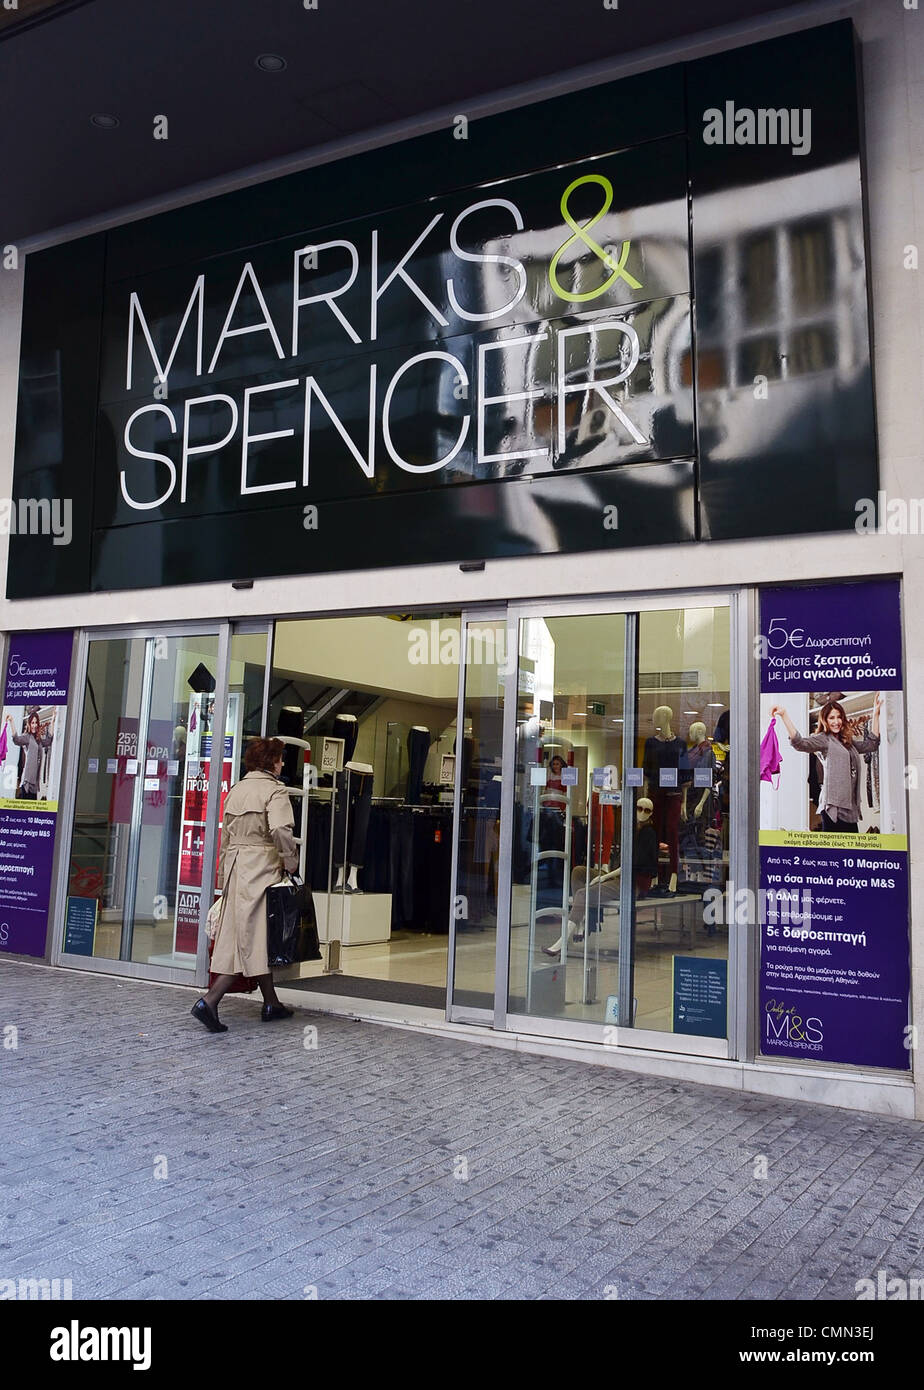 uk shop Marks & Spencer in Athens Stock Photo - Alamy